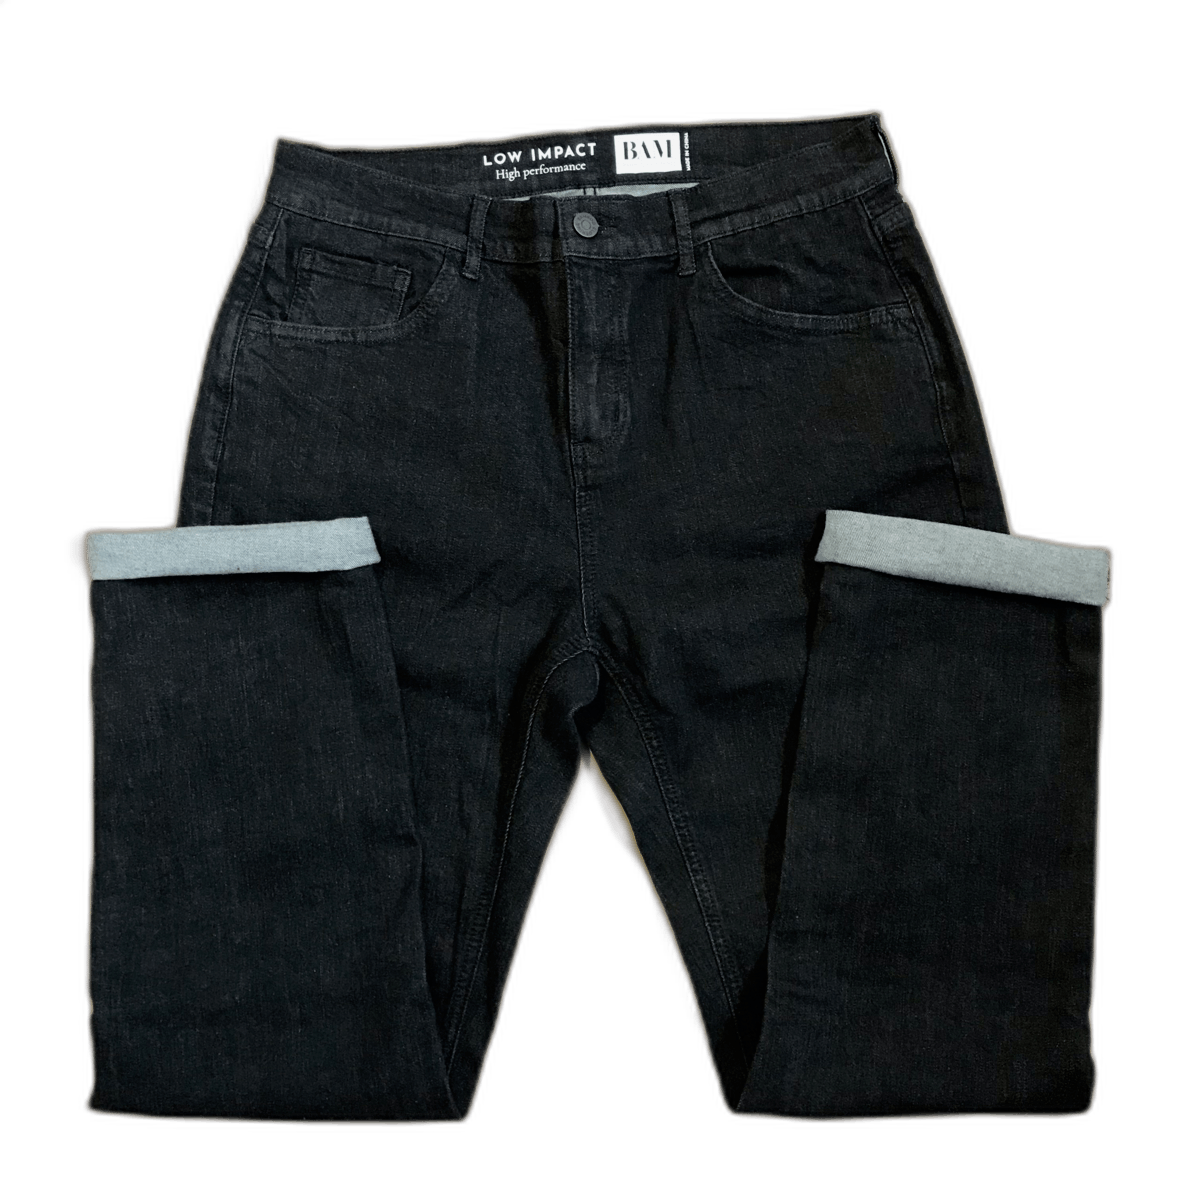 BAM 73 Zero Bamboo Jeans Review | Sustainable Denim